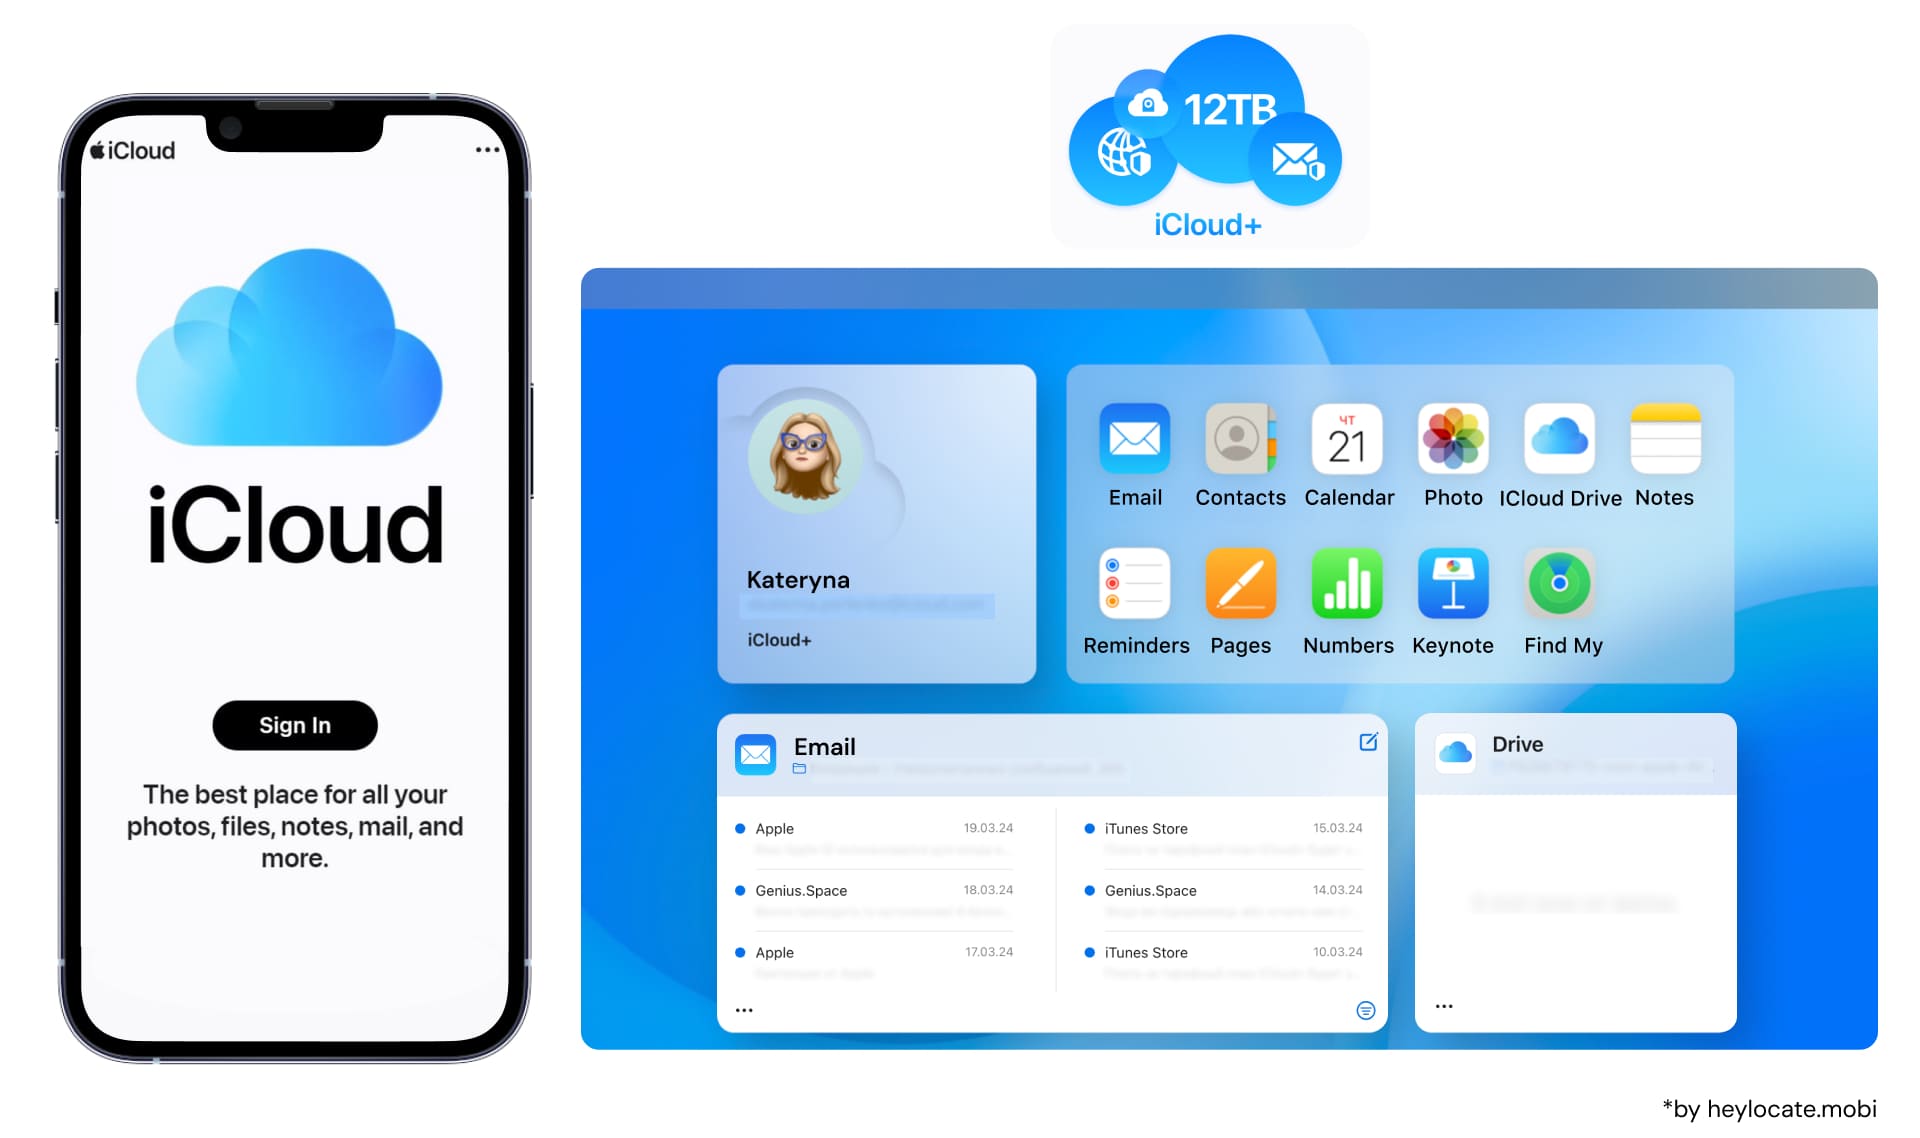 Screenshots showing a smartphone with iCloud sign-in screen and a desktop interface displaying iCloud storage and services.